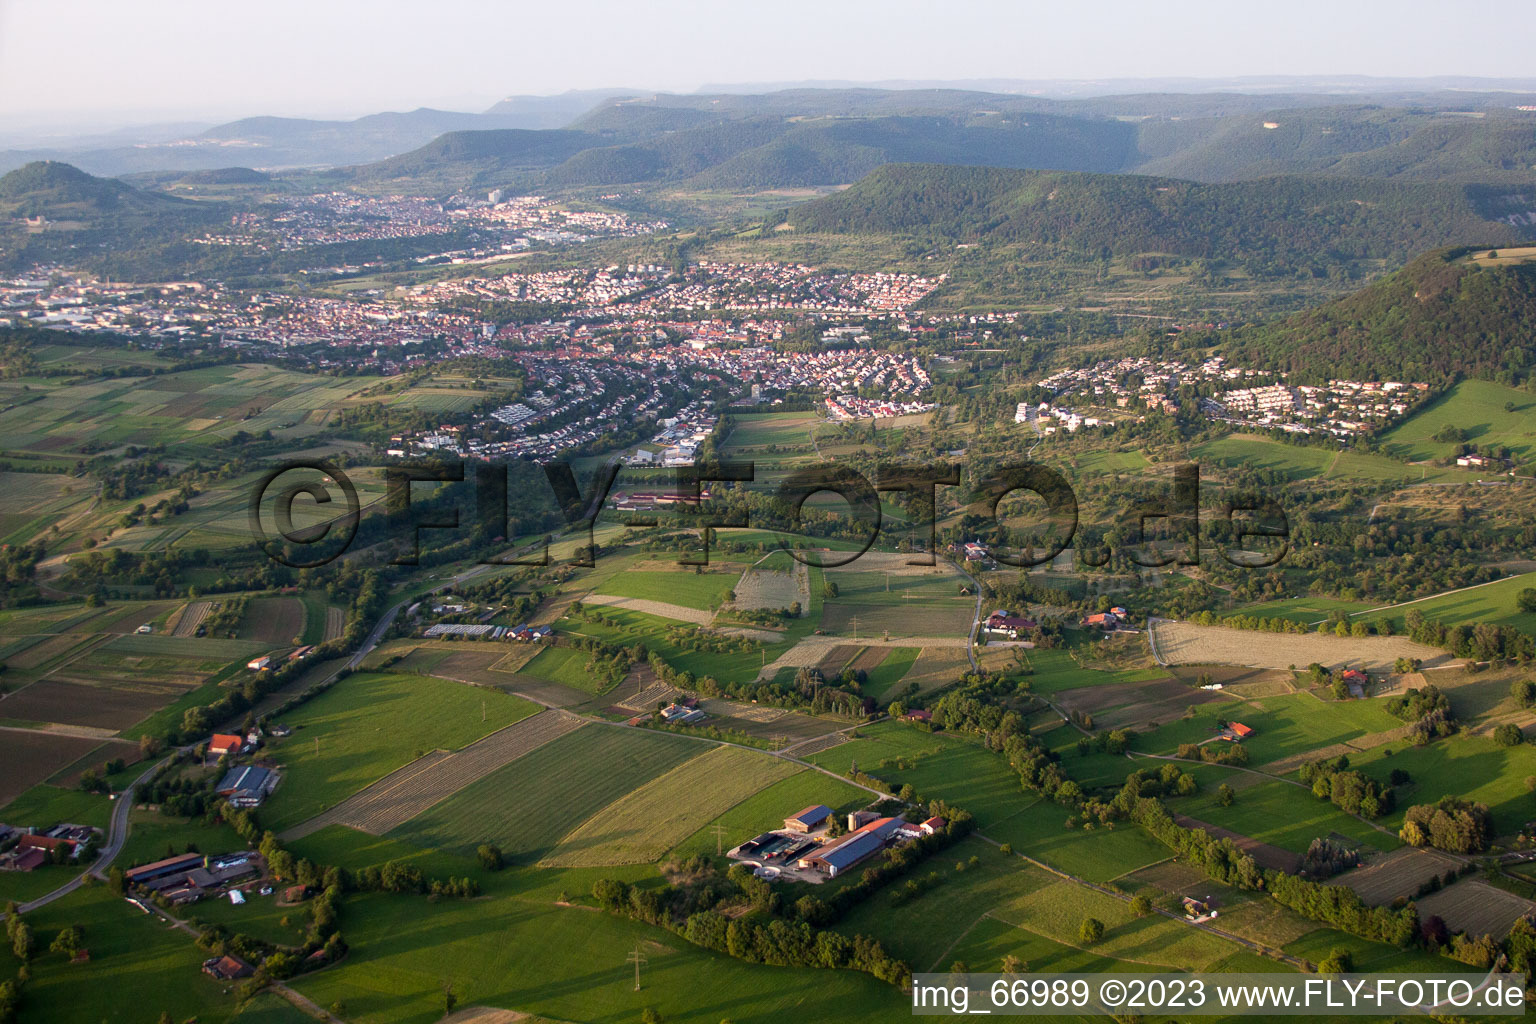 Reutlingen in the state Baden-Wuerttemberg, Germany seen from above